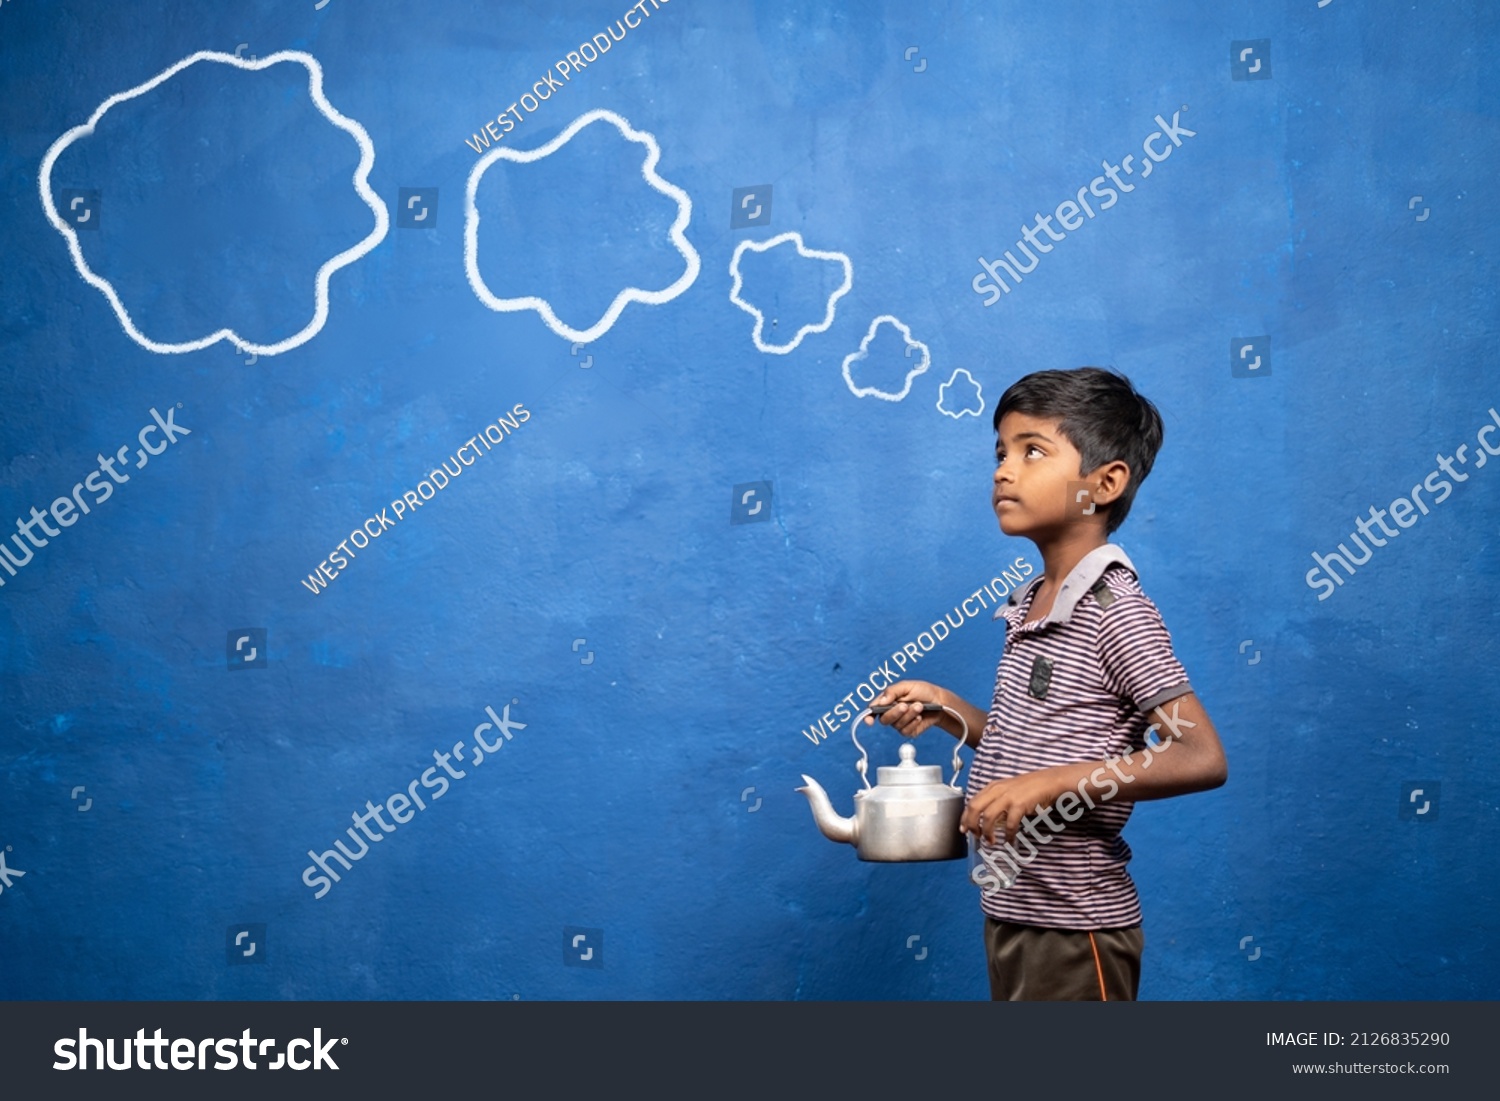 poor tea selling kid thinking by holding tea glass and container in hand with cloud doodle drawing on blue background - cocept of poverty, child labour and imagination #2126835290